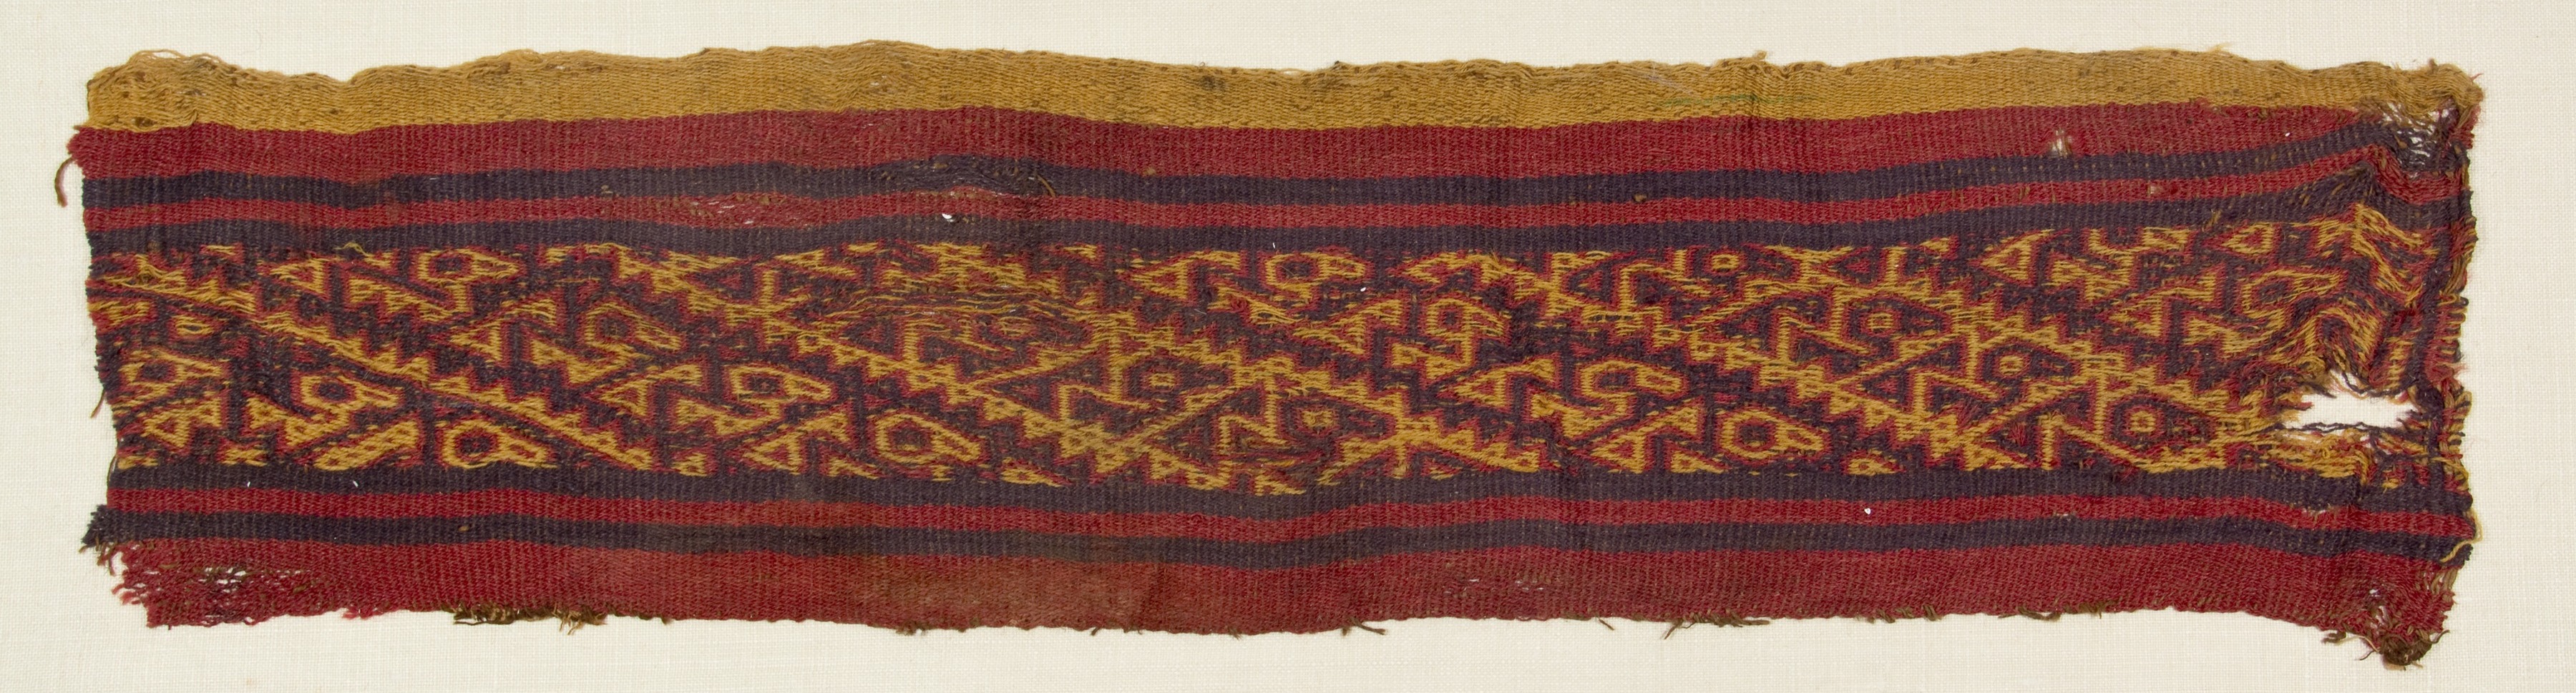 Textile fragment, Chancay, Peruvian, 53.4 x 12.7cm, The Art and Art History Collection.